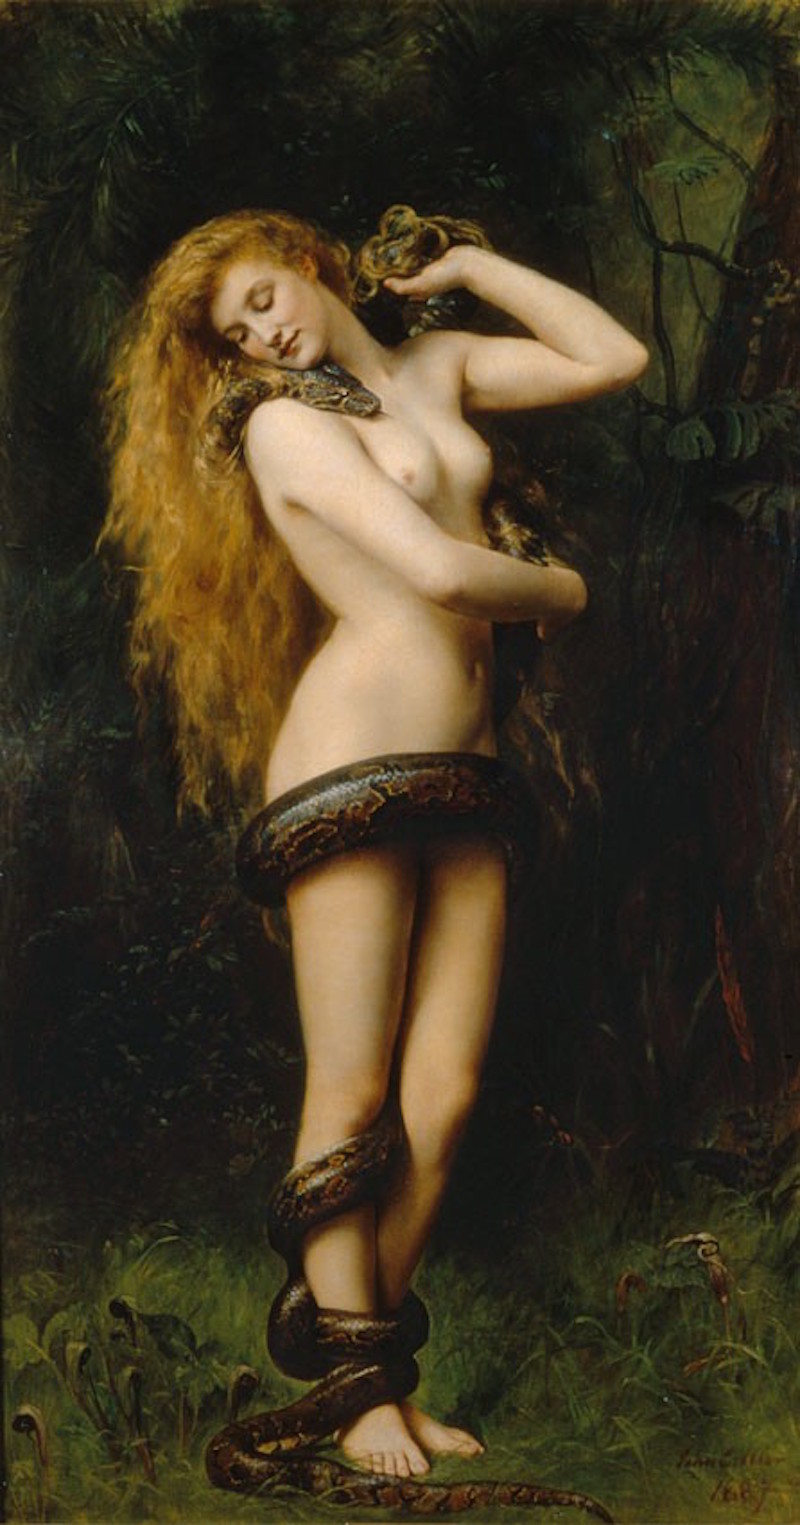 Lilith by John Collier - 1892 - - The Atkinson